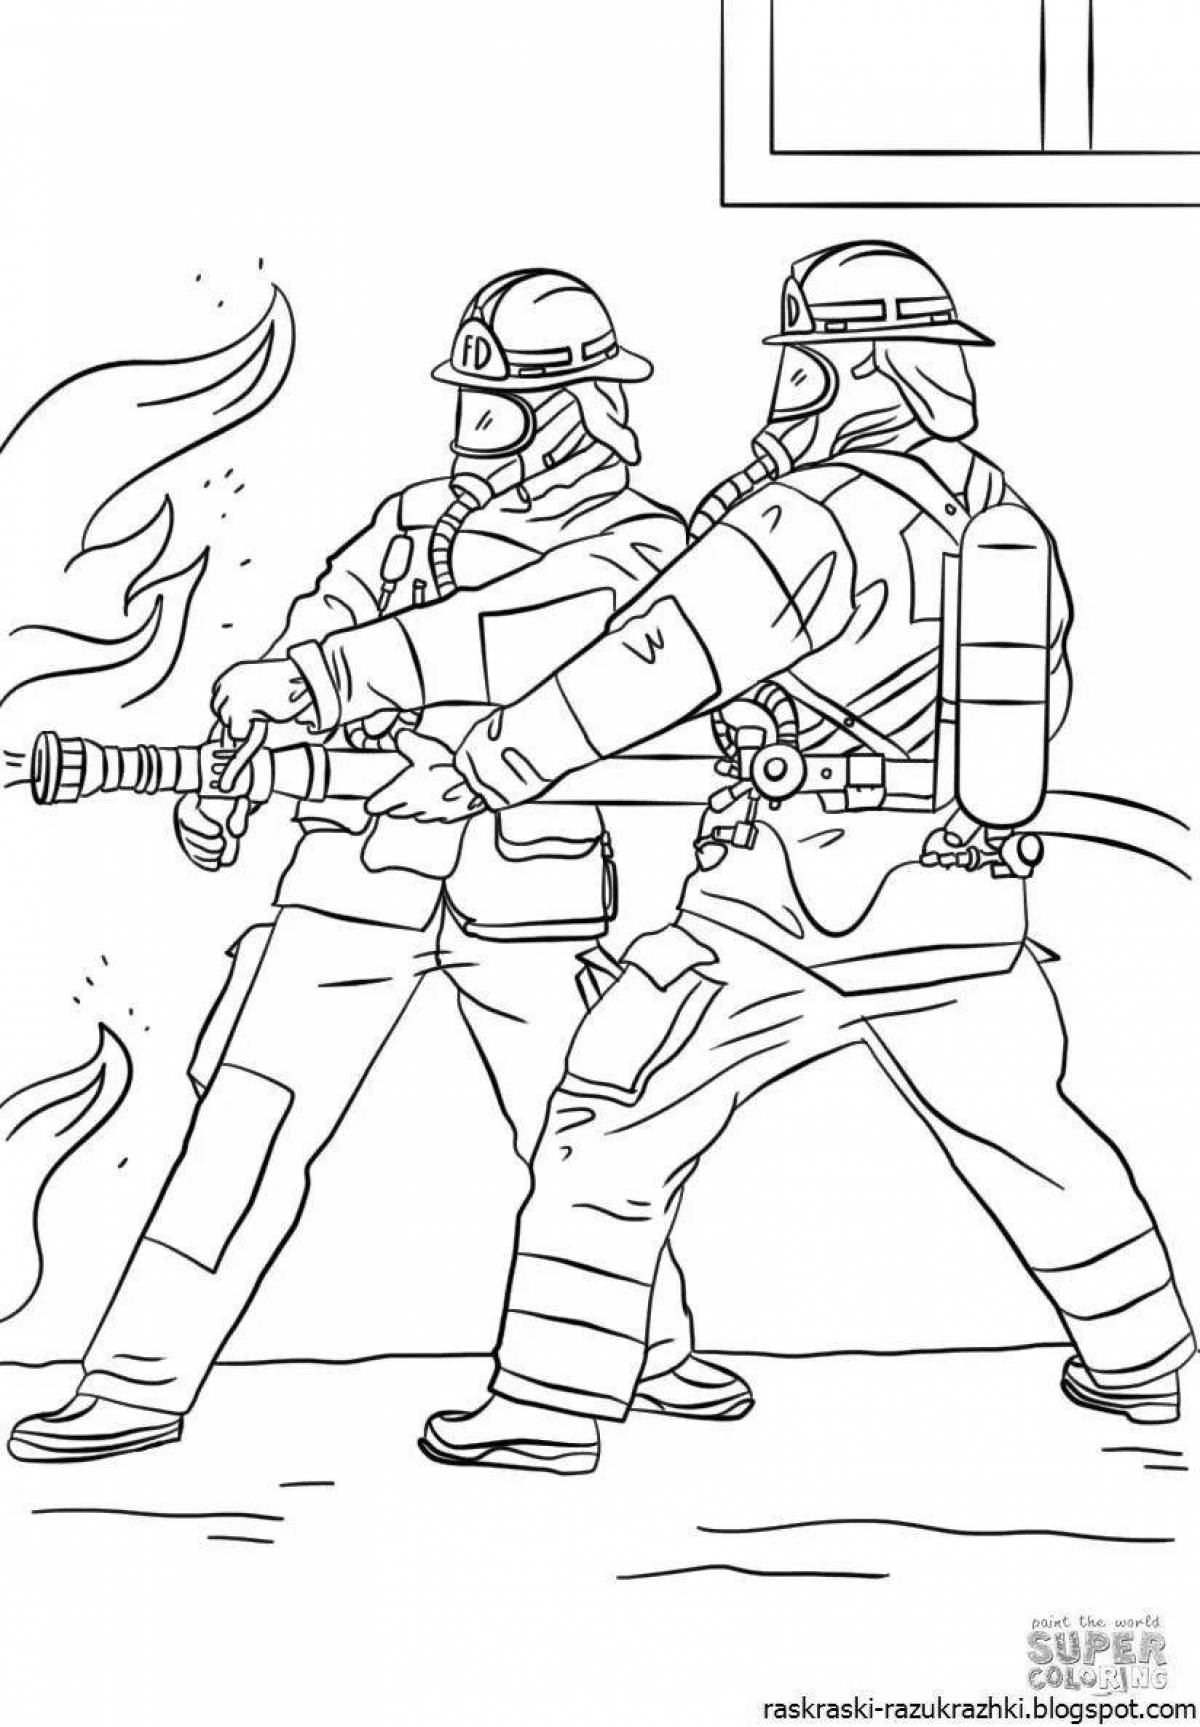 Fabulous fire fighting coloring book